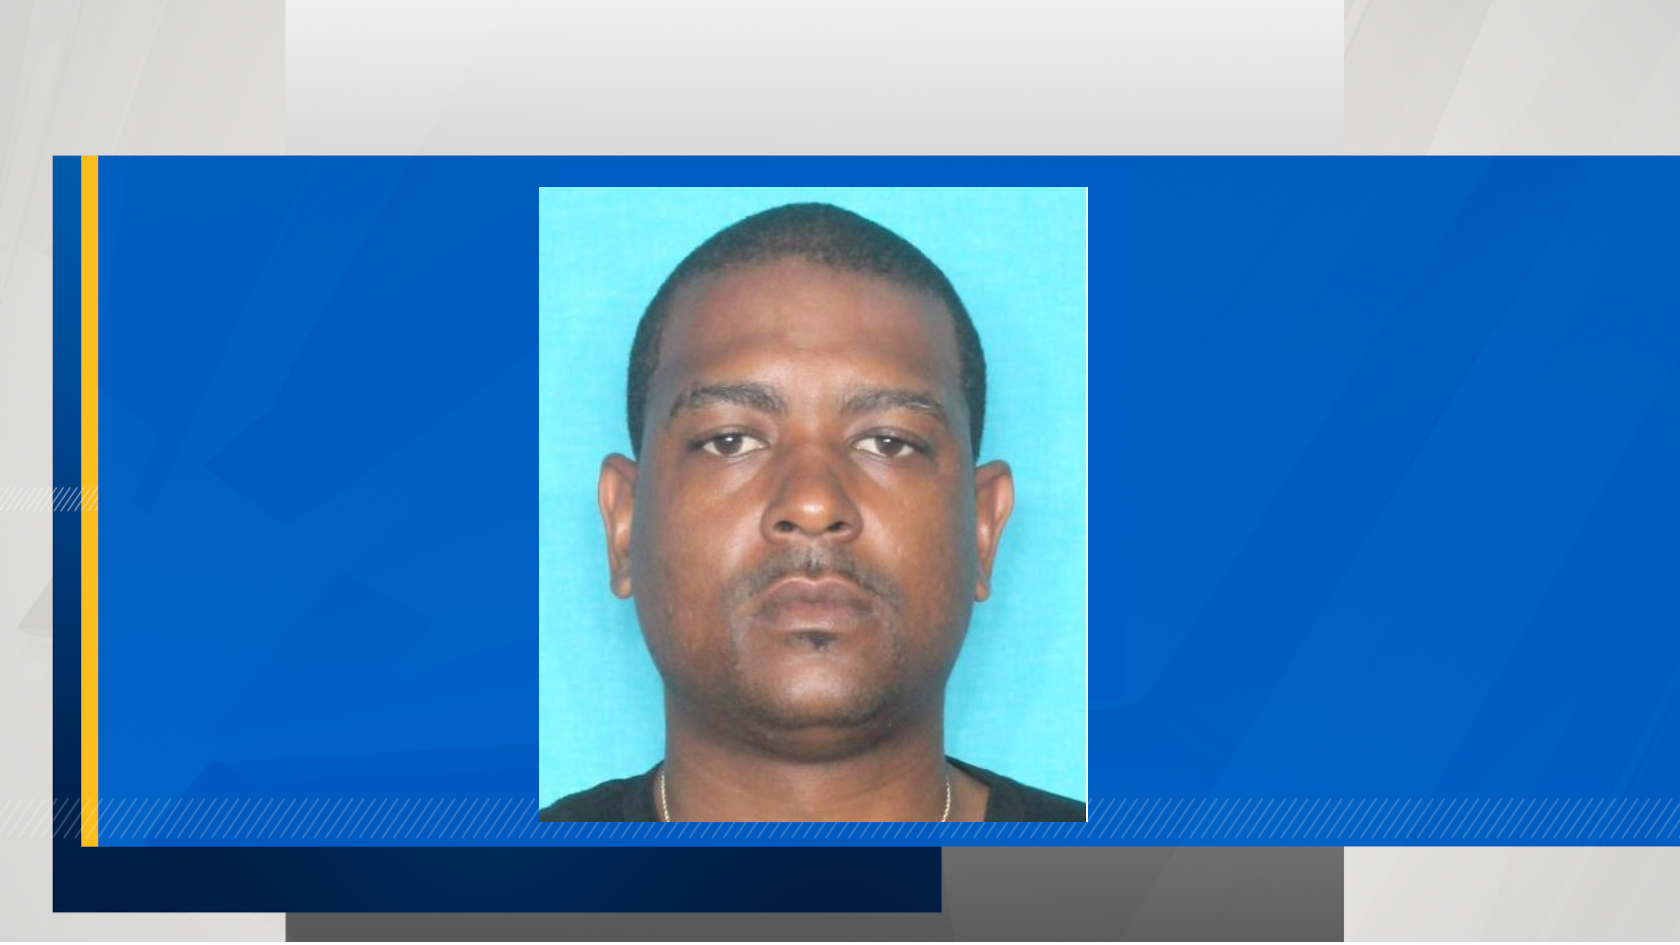 https://digital-stage.wgno.com/news/crime/have-you-seen-this-man-nopd-seeks-person-of-interest-in-mardi-gras-homicide/